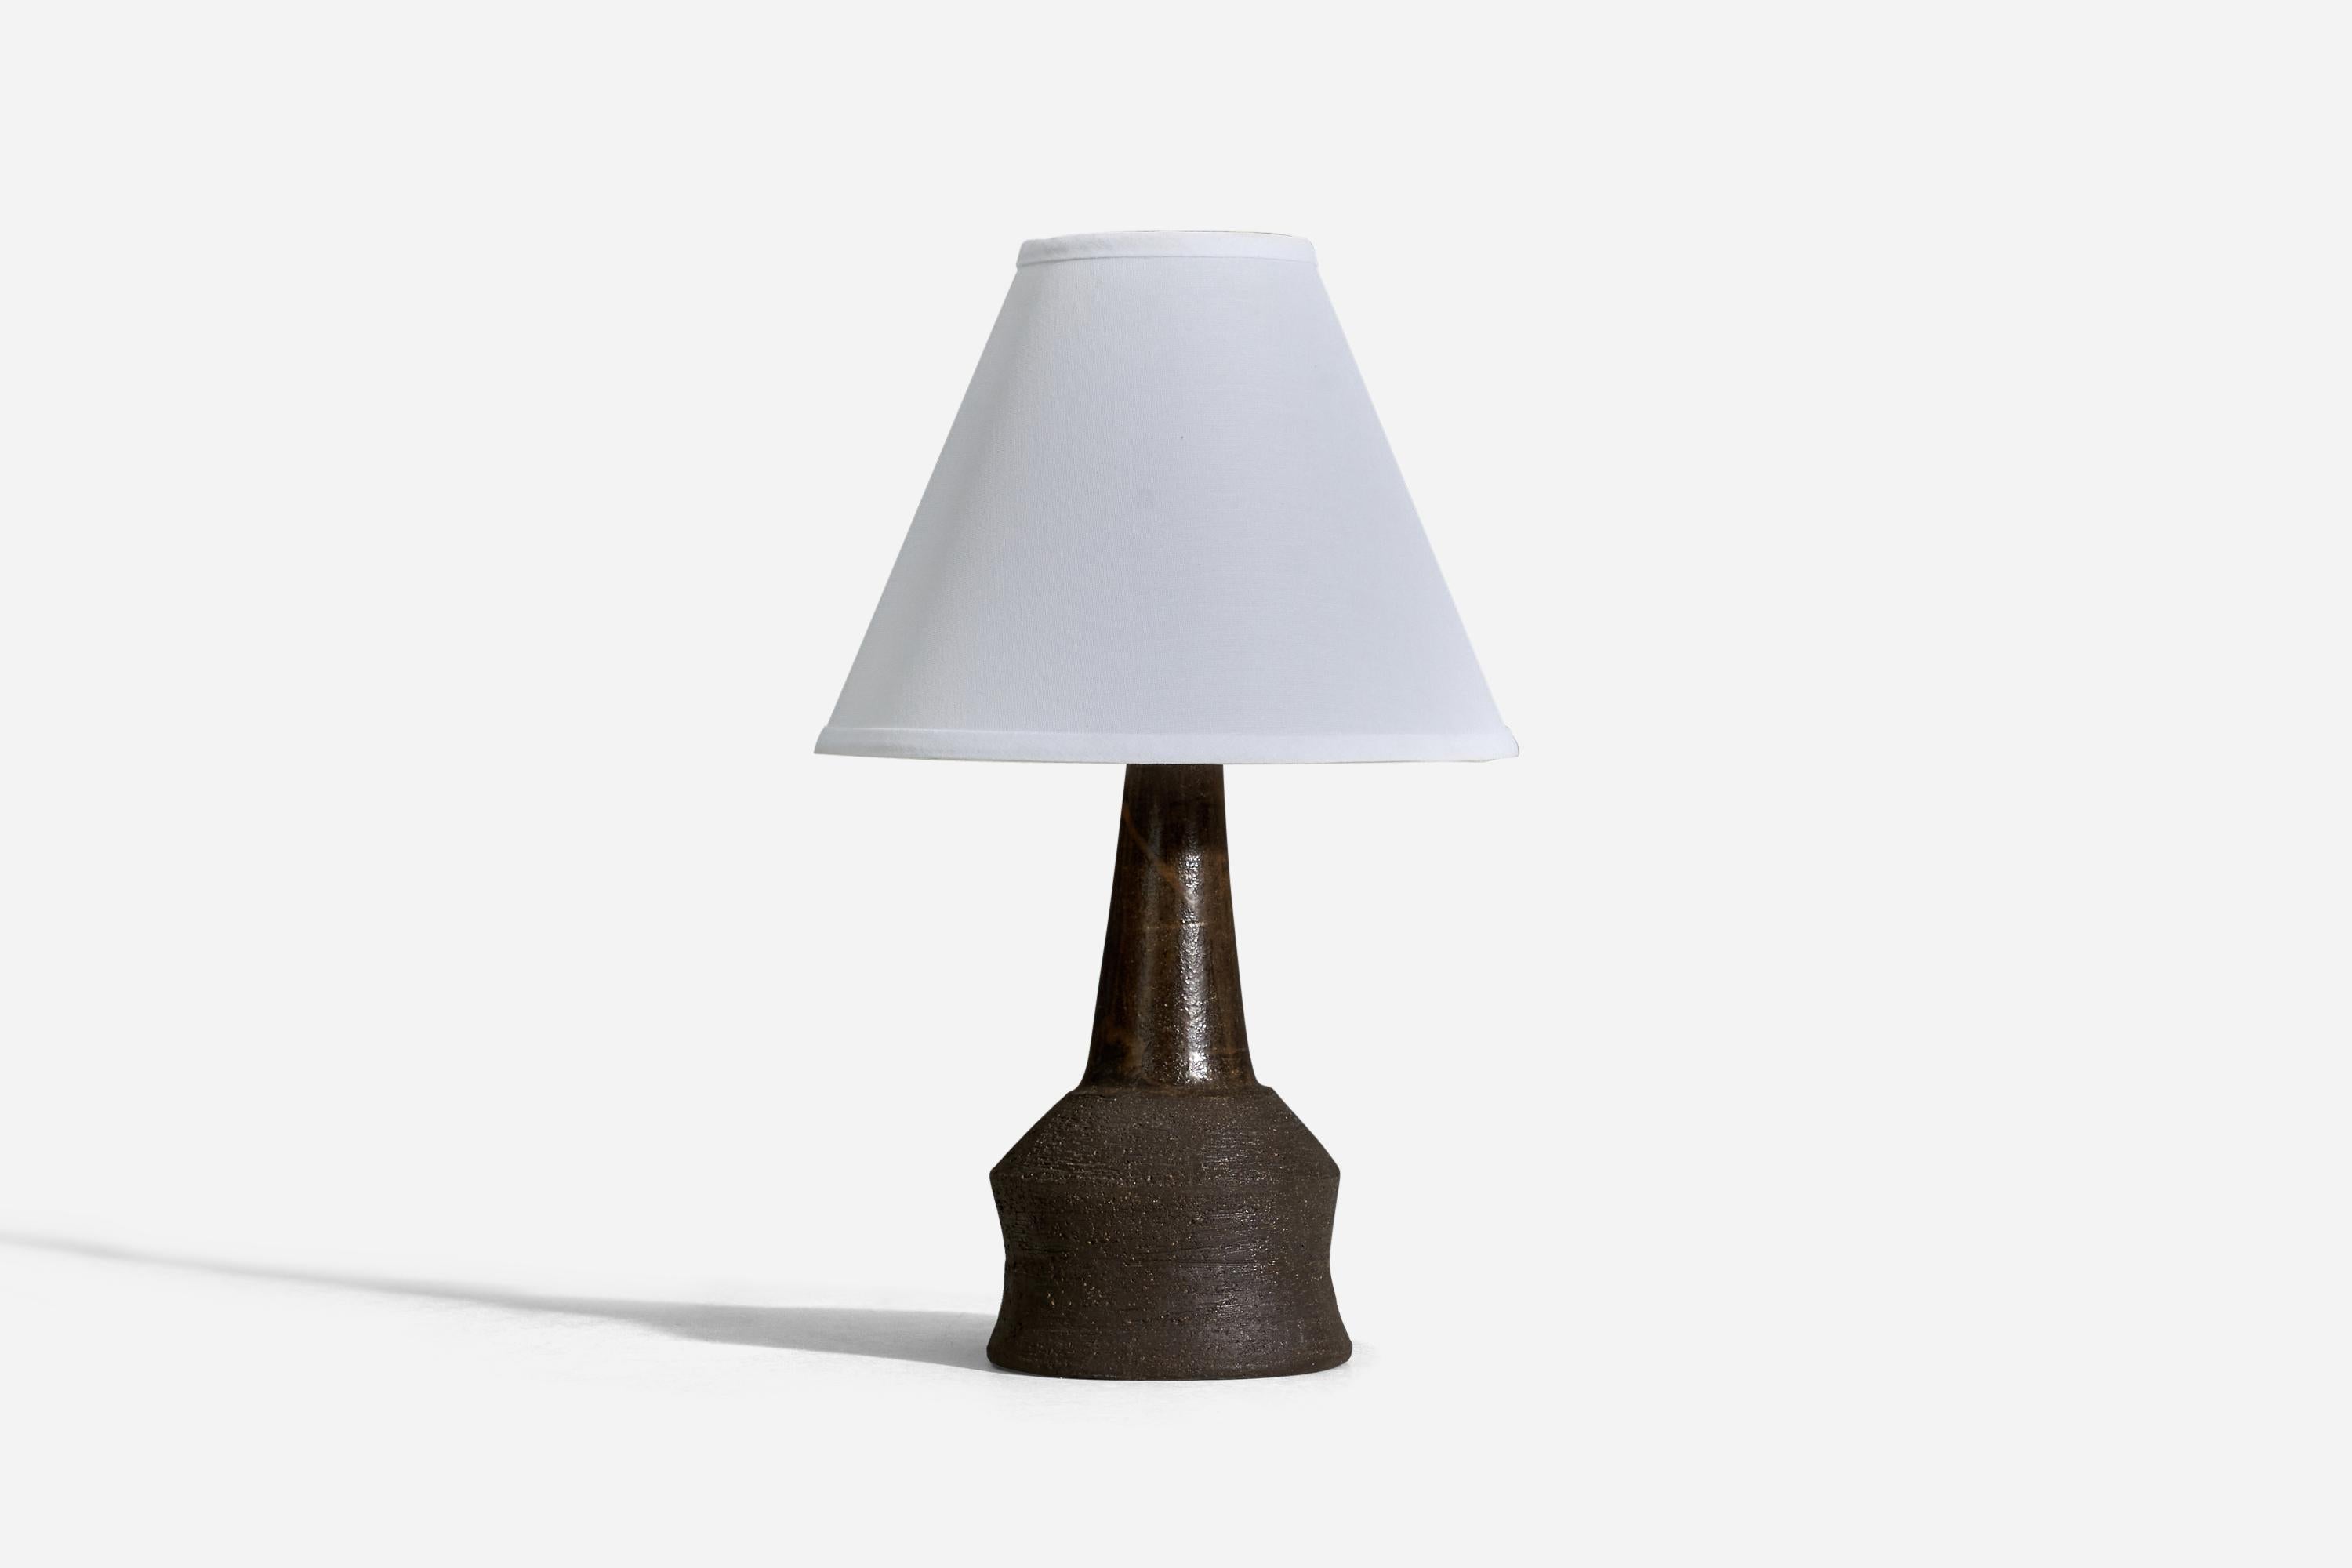 A brown glazed stoneware table lamp designed and produced by Lene Rykke, Denmark, 1960s. 

Sold without lampshade
Dimensions of lamp (inches) : 12 x 5.25 x 5.25 (Height x Width x Depth)
Dimensions of lampshade (inches) : 4 x 10 x 8 (Top Diameter